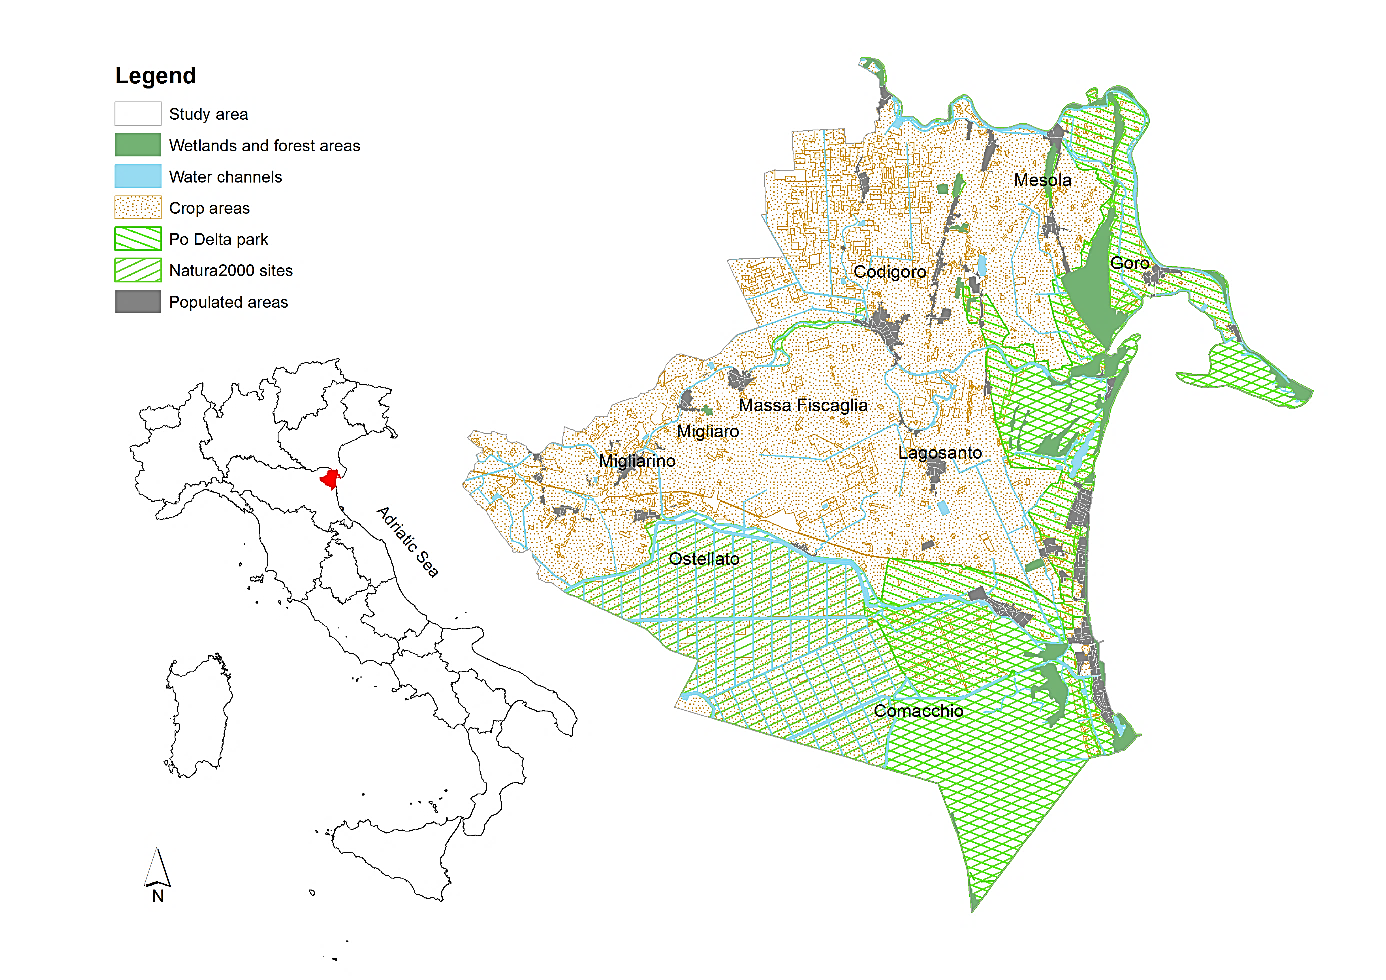 Location and main landscape composition of the eastern lowlands of Ferrara, northeast Emilia-Romagna